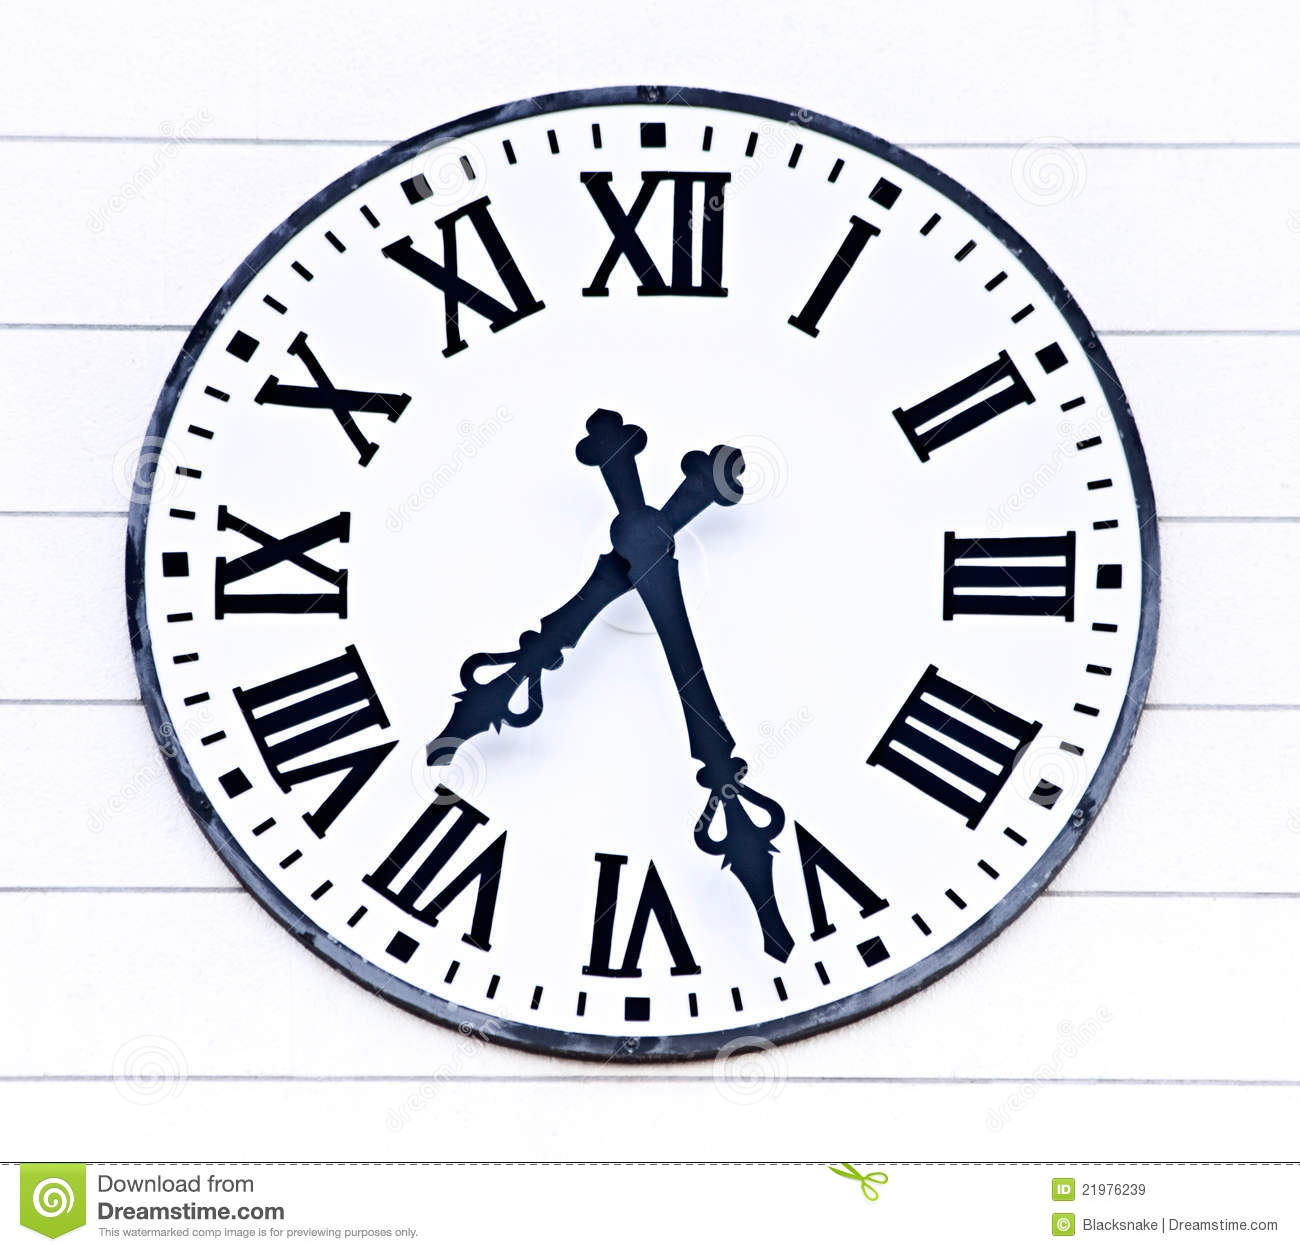 Old Analogue Church Clock Time Royalty Free Stock Images   Image